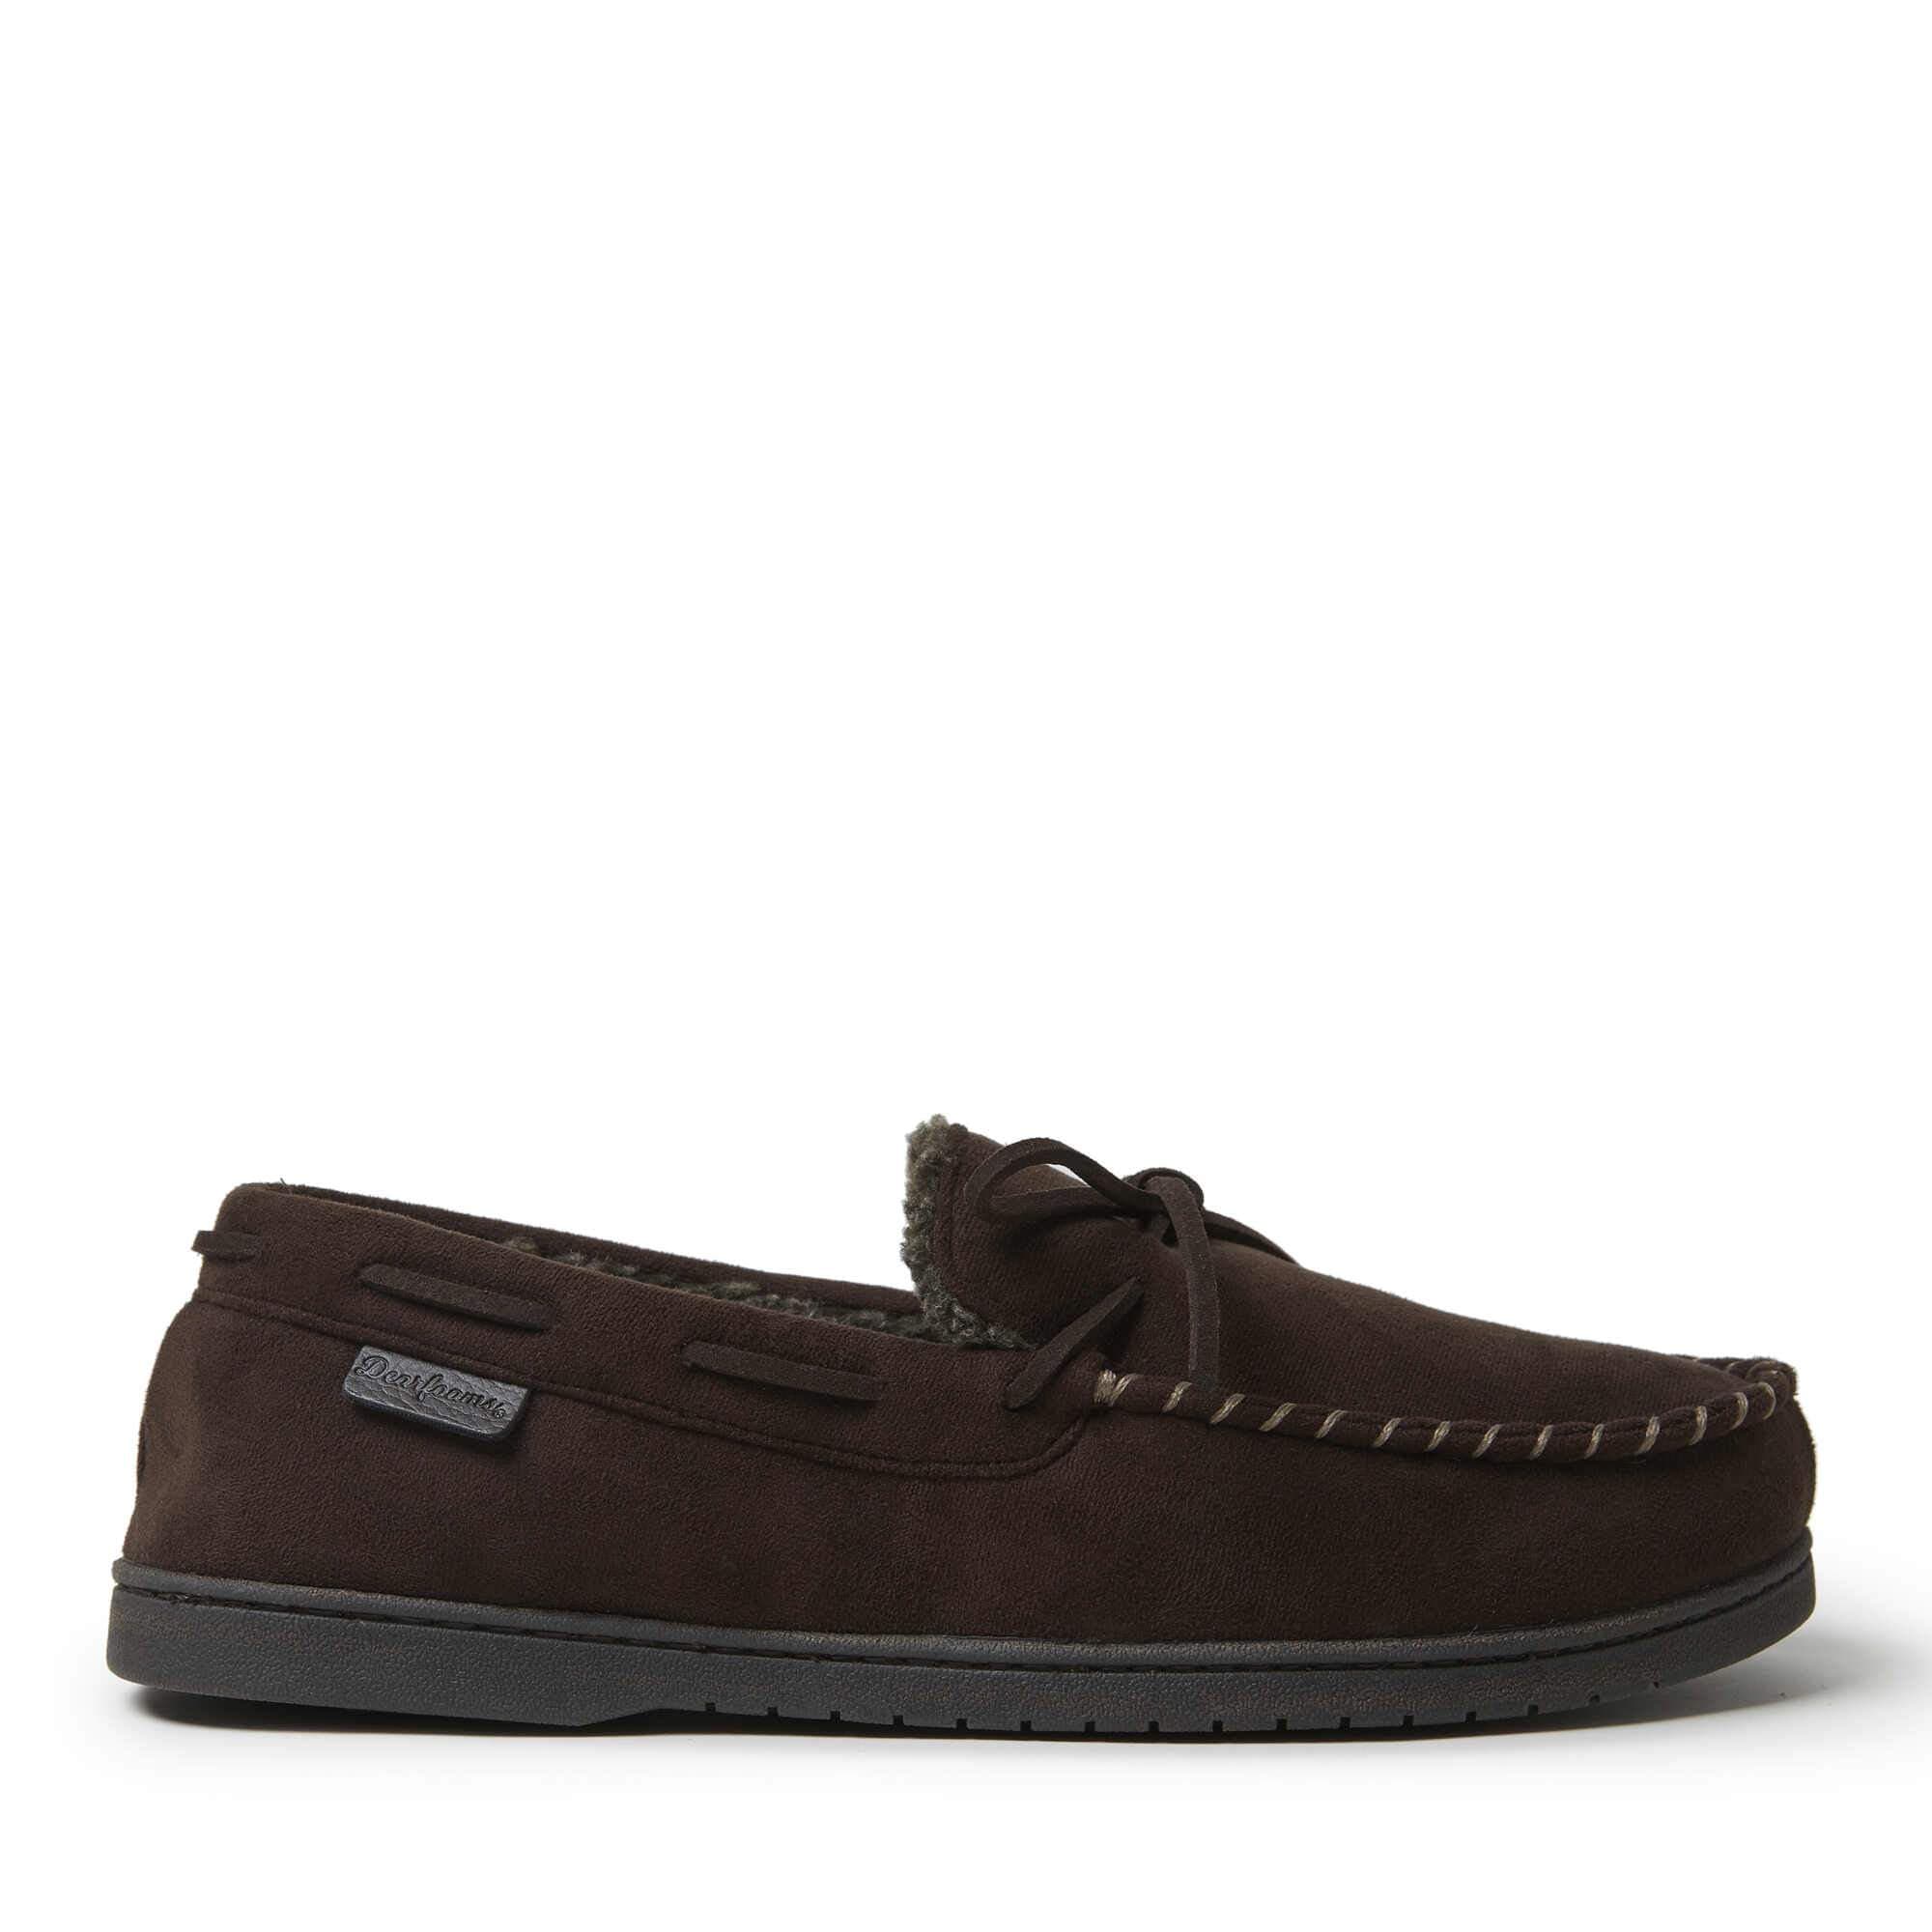 Toby Microsuede Tie Moccasin product image